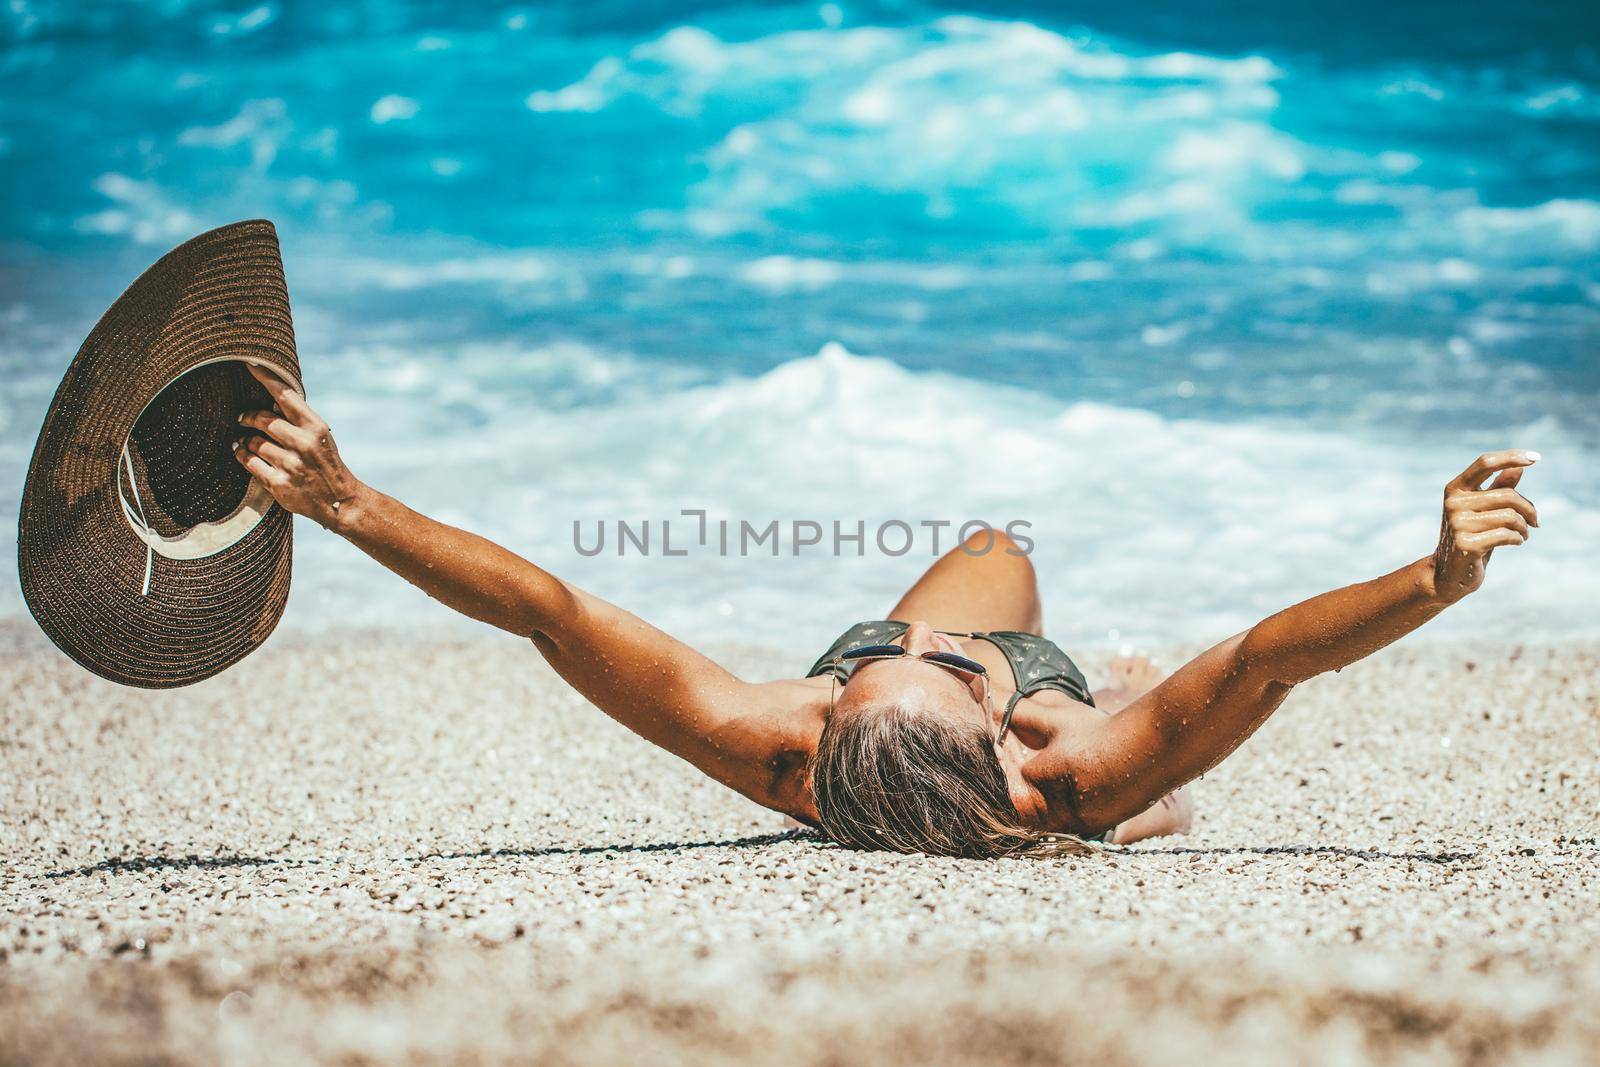 A young woman relaxing on the beach. She is lounging and sunbathing on the coast in the sea.